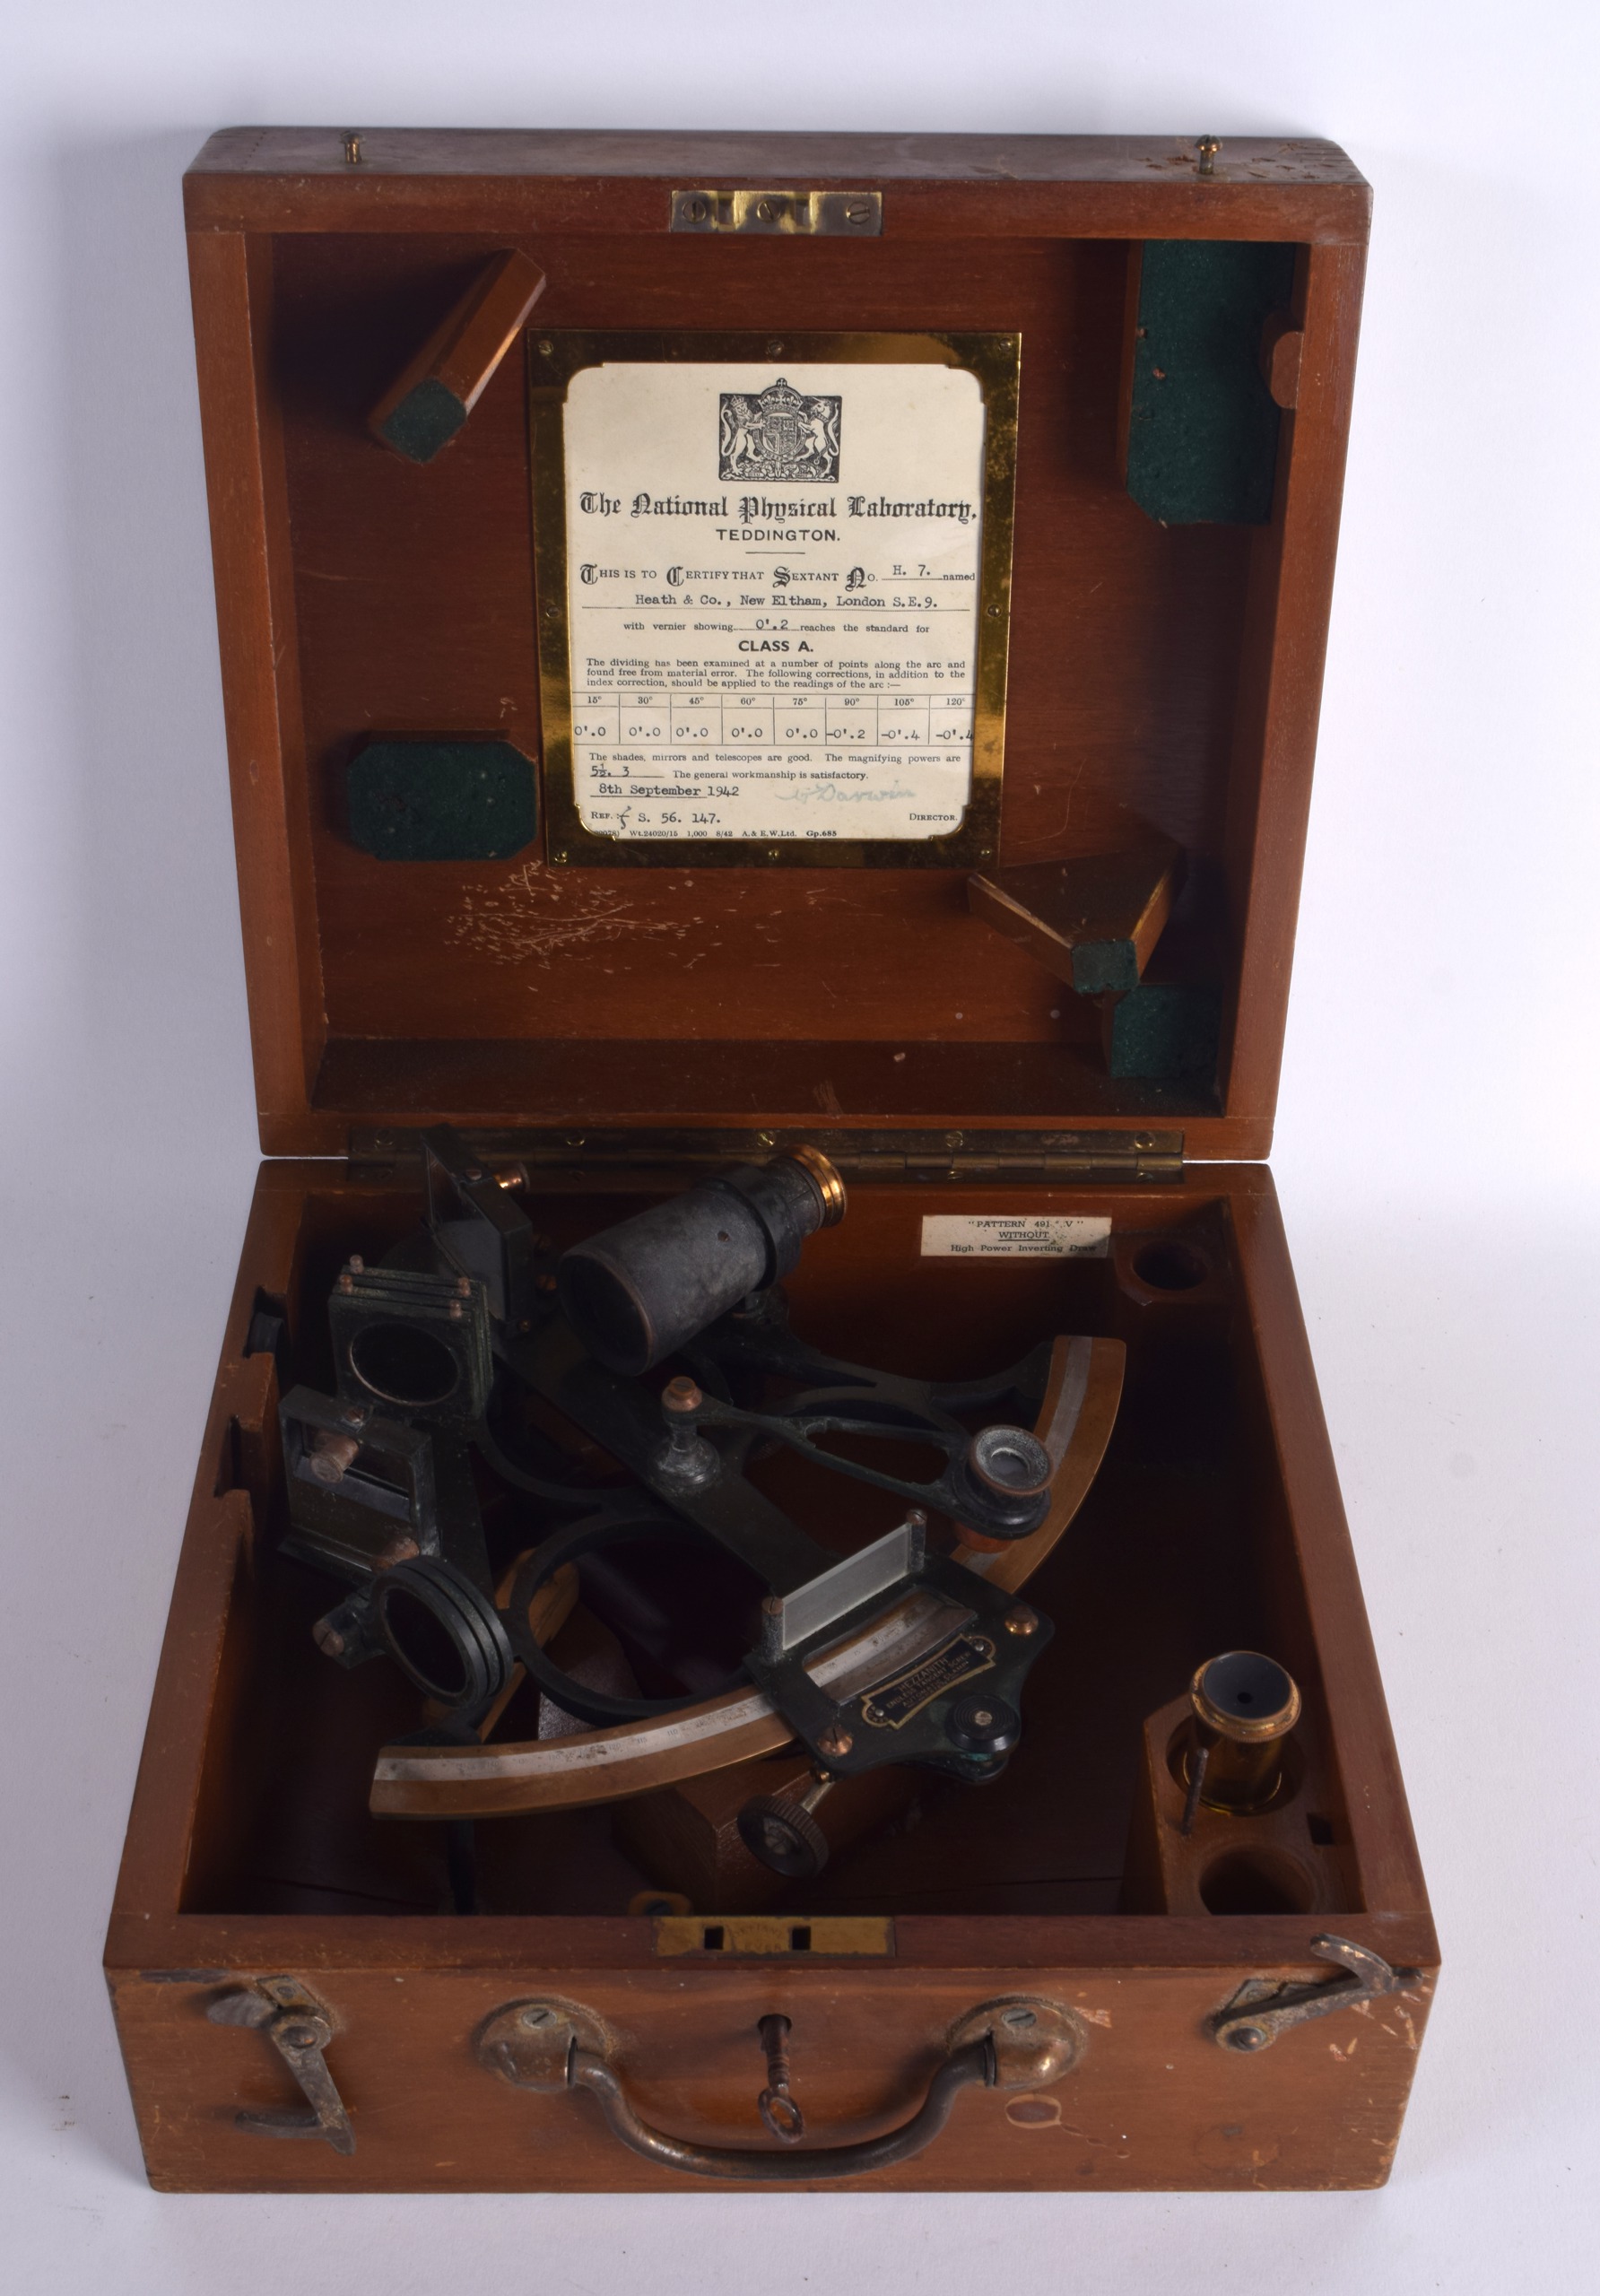 A CASED HEATH & CO OF LONDON HEZZANITH AUTOMATIC CLAMPING INSTRUMENT. 18 cm x 21 cm.